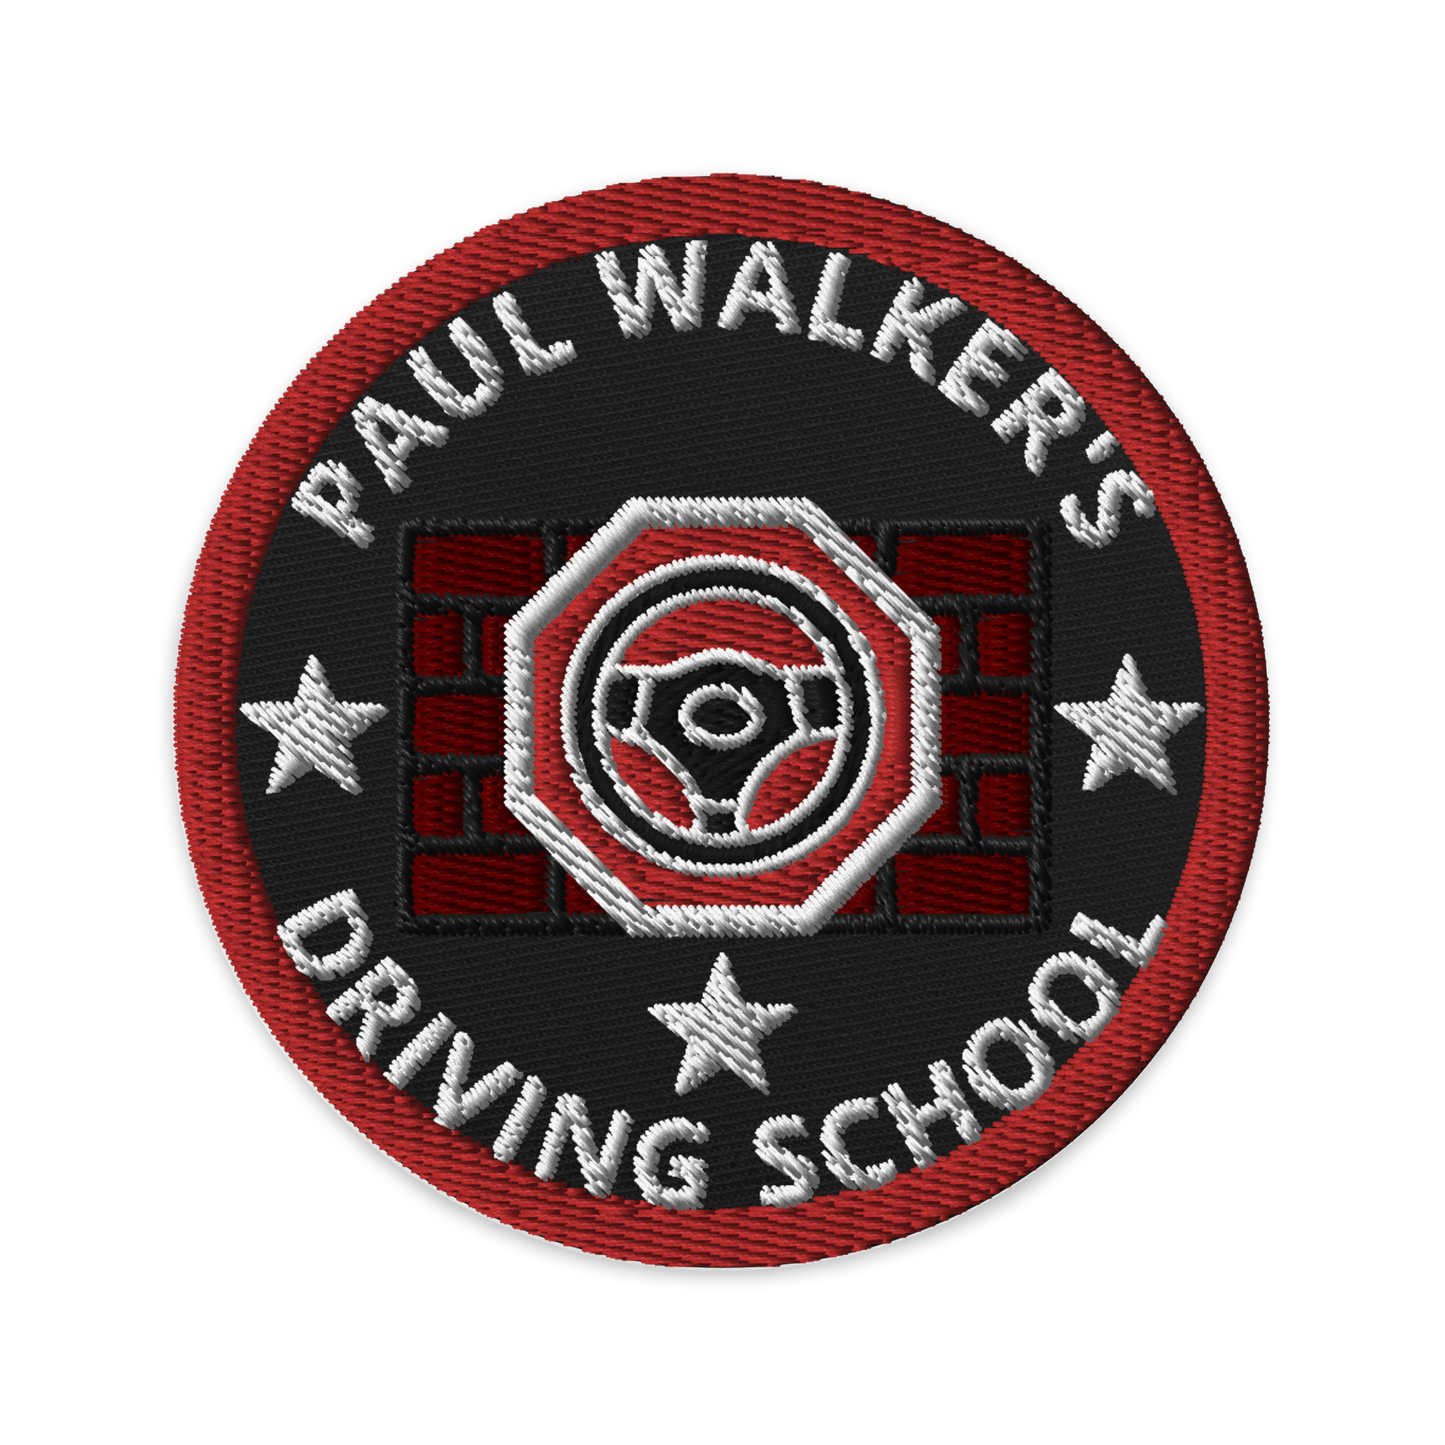 Identity Patches: Walker's School of Driving